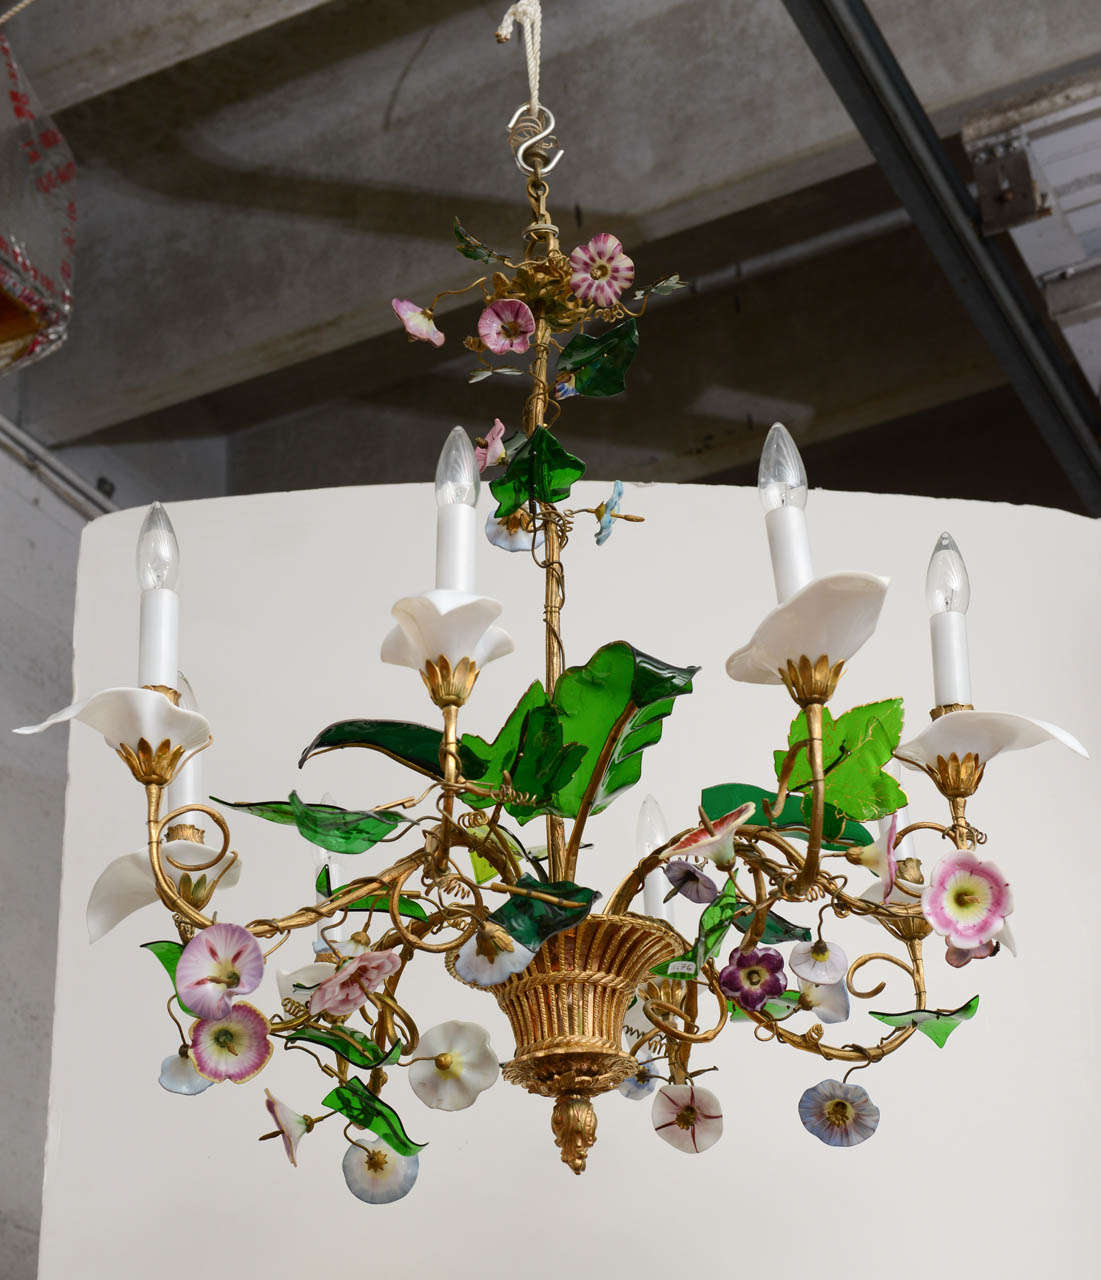 Very rare and elegant chandelier, Charles 'X' colored glass flowers and leaves golden bronze stems. The chandelier is in the French Louis XVs style.

Wired for the US. When illuminated, each flower and leave are brighting and luminescent from the